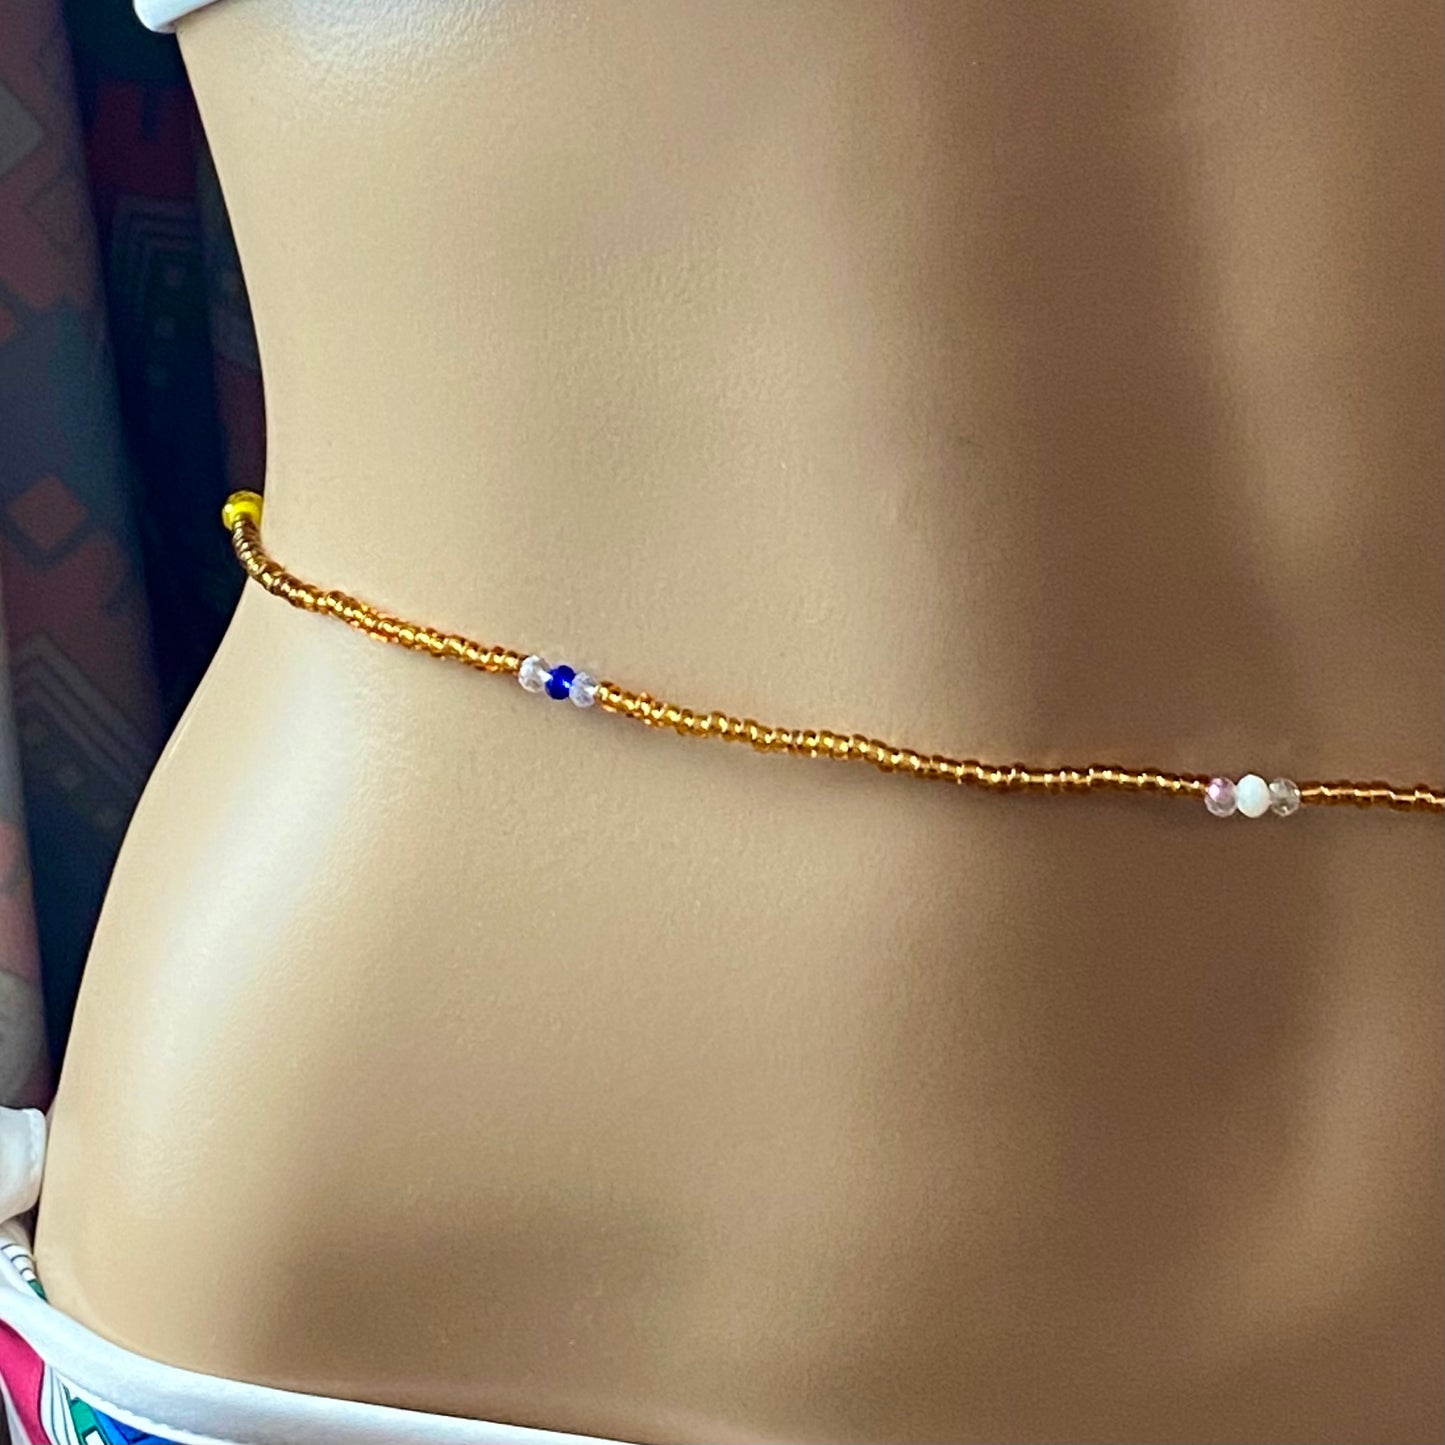 Gold Belly Chain with Flower Accent Waist Beads